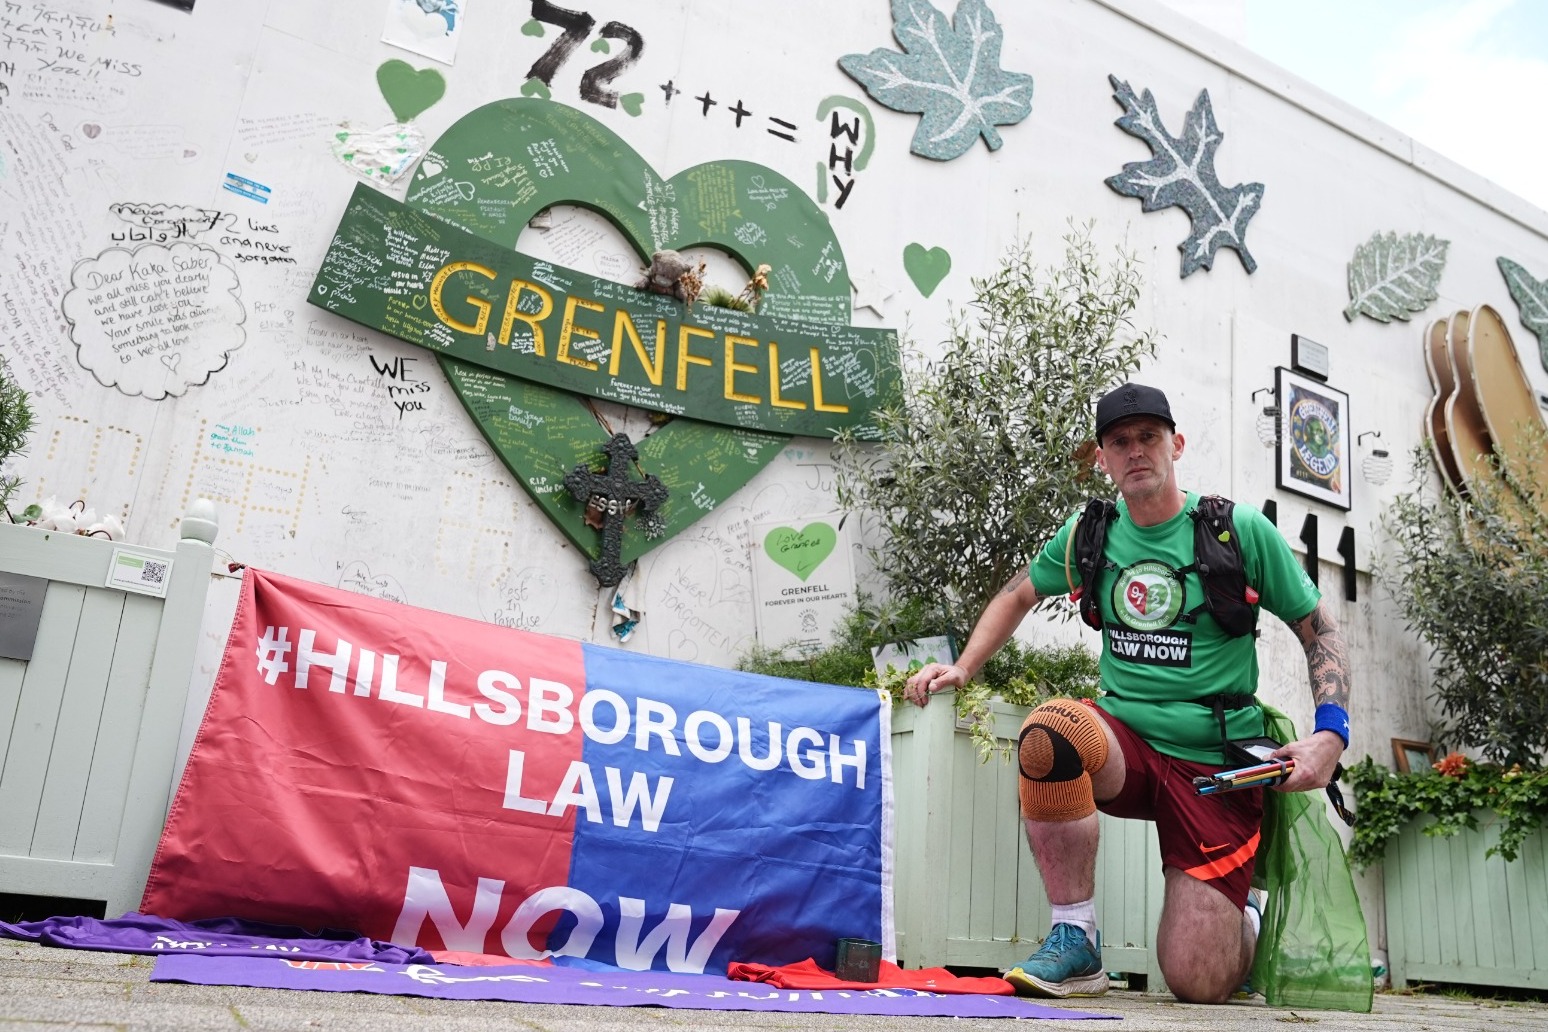 Runner reaches Grenfell after 227 mile challenge